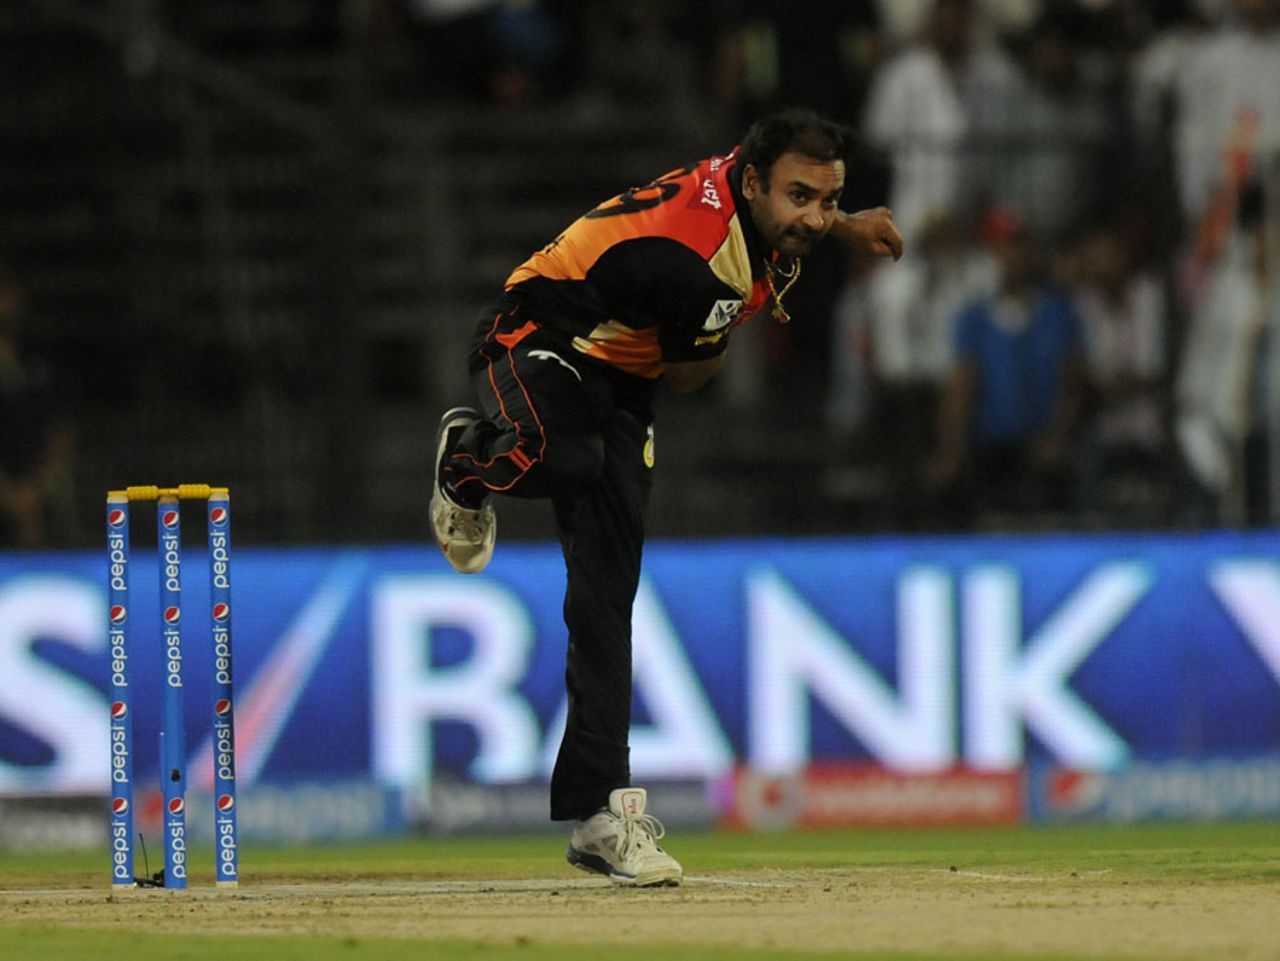 Amit Mishra was expensive in his four overs, Kings XI Punjab v Sunrisers Hyderabad, IPL 2014, Sharjah, April 22, 2014